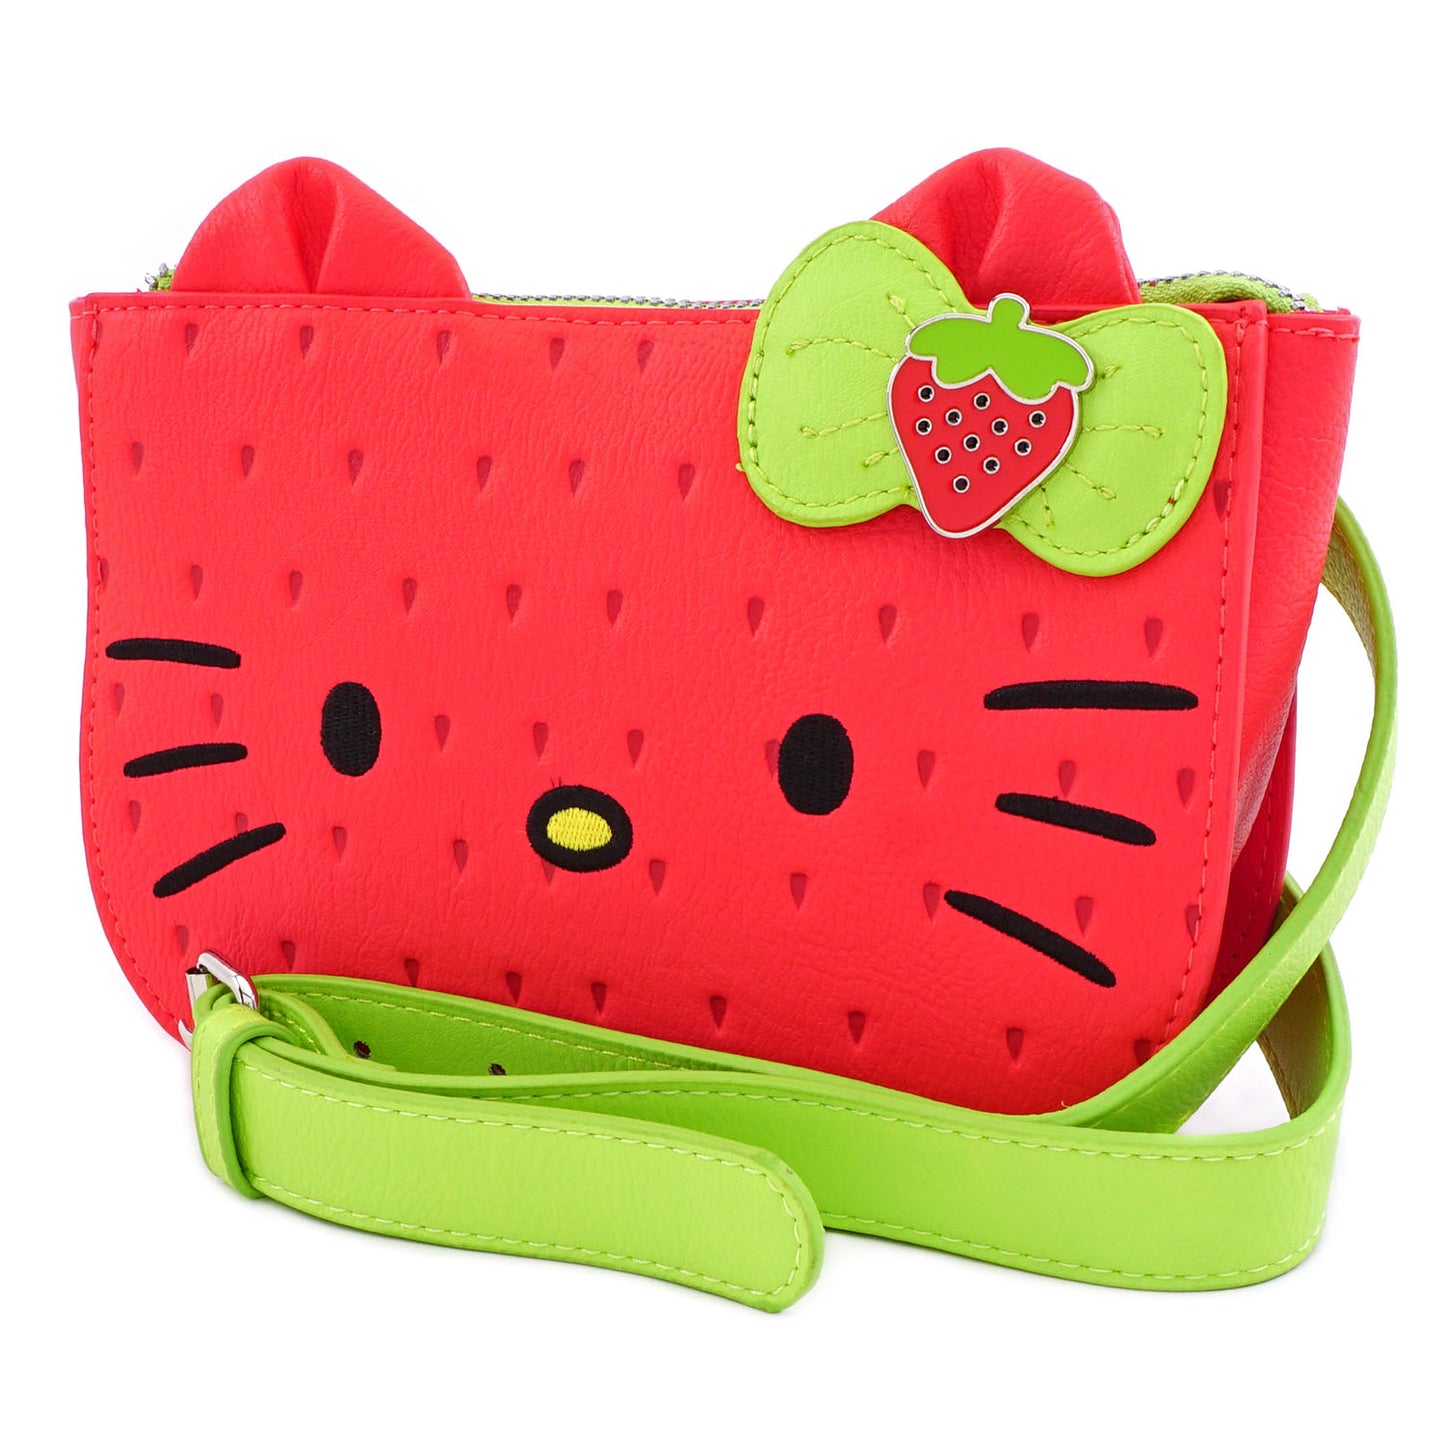 Loungefly x Hello Kitty - Strawberry Faux Leather Waist Bag